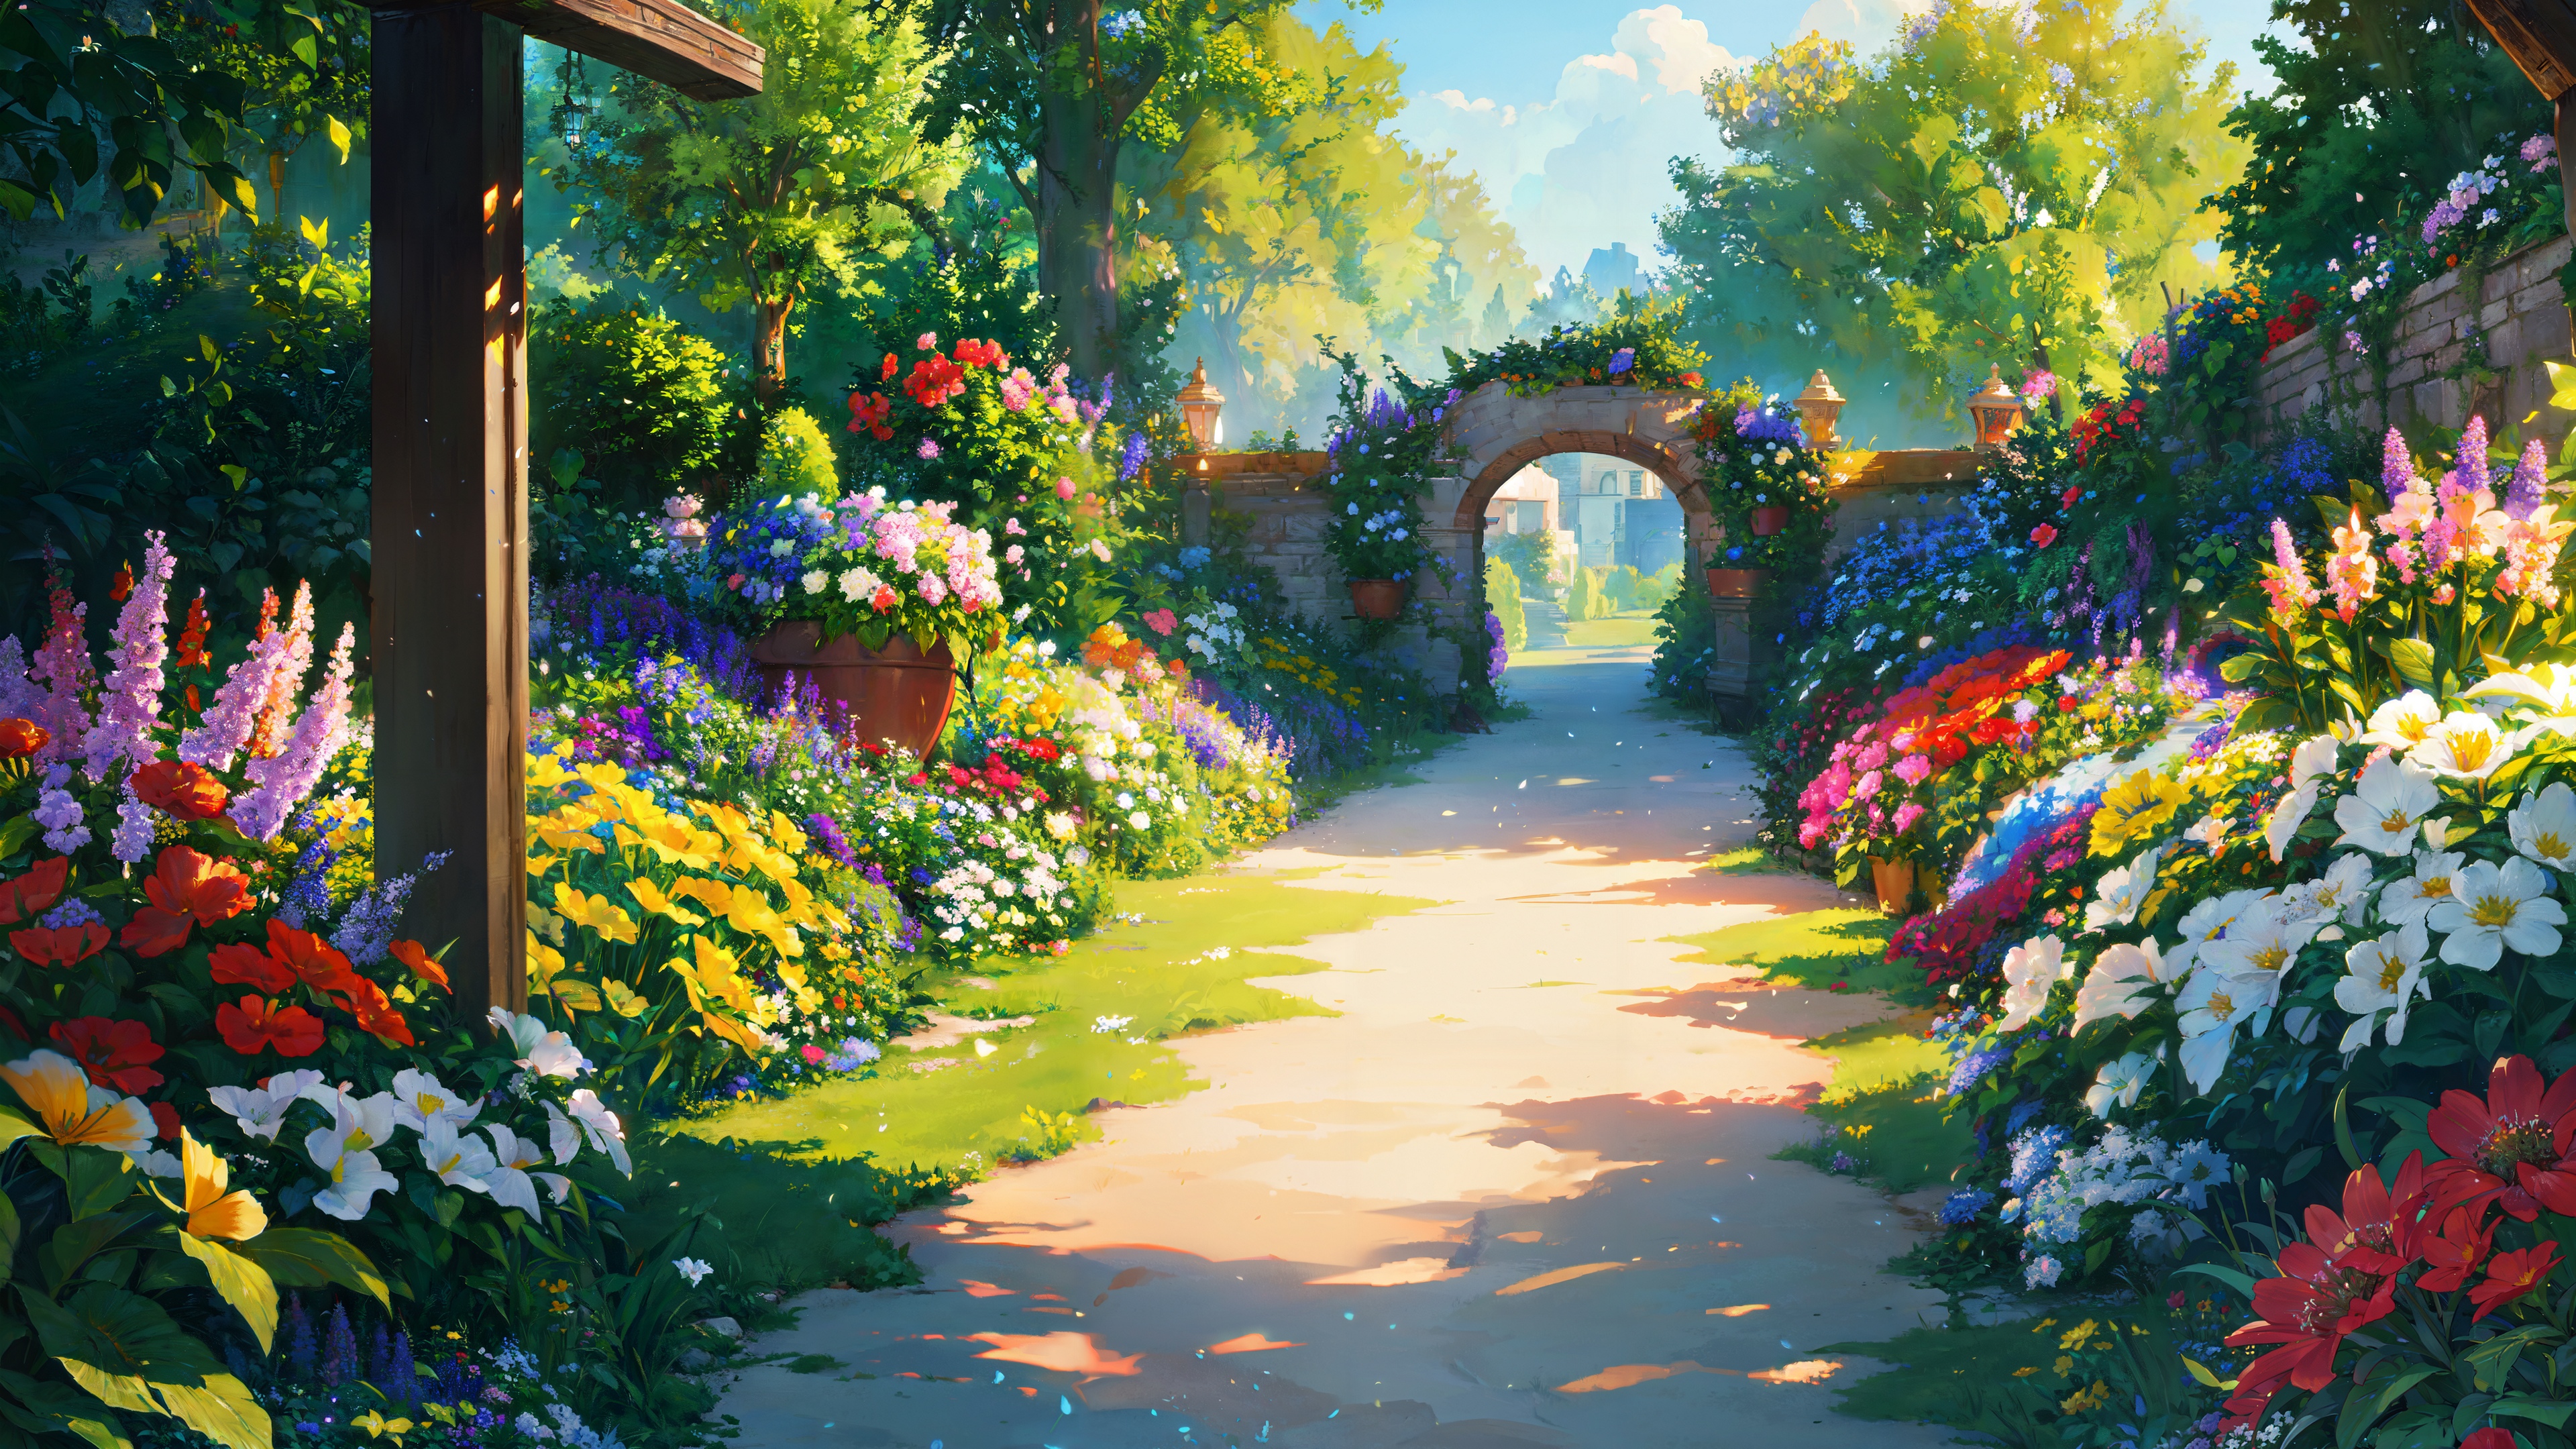 Paint drawing of a garden in flowers with a path going to a stone archway